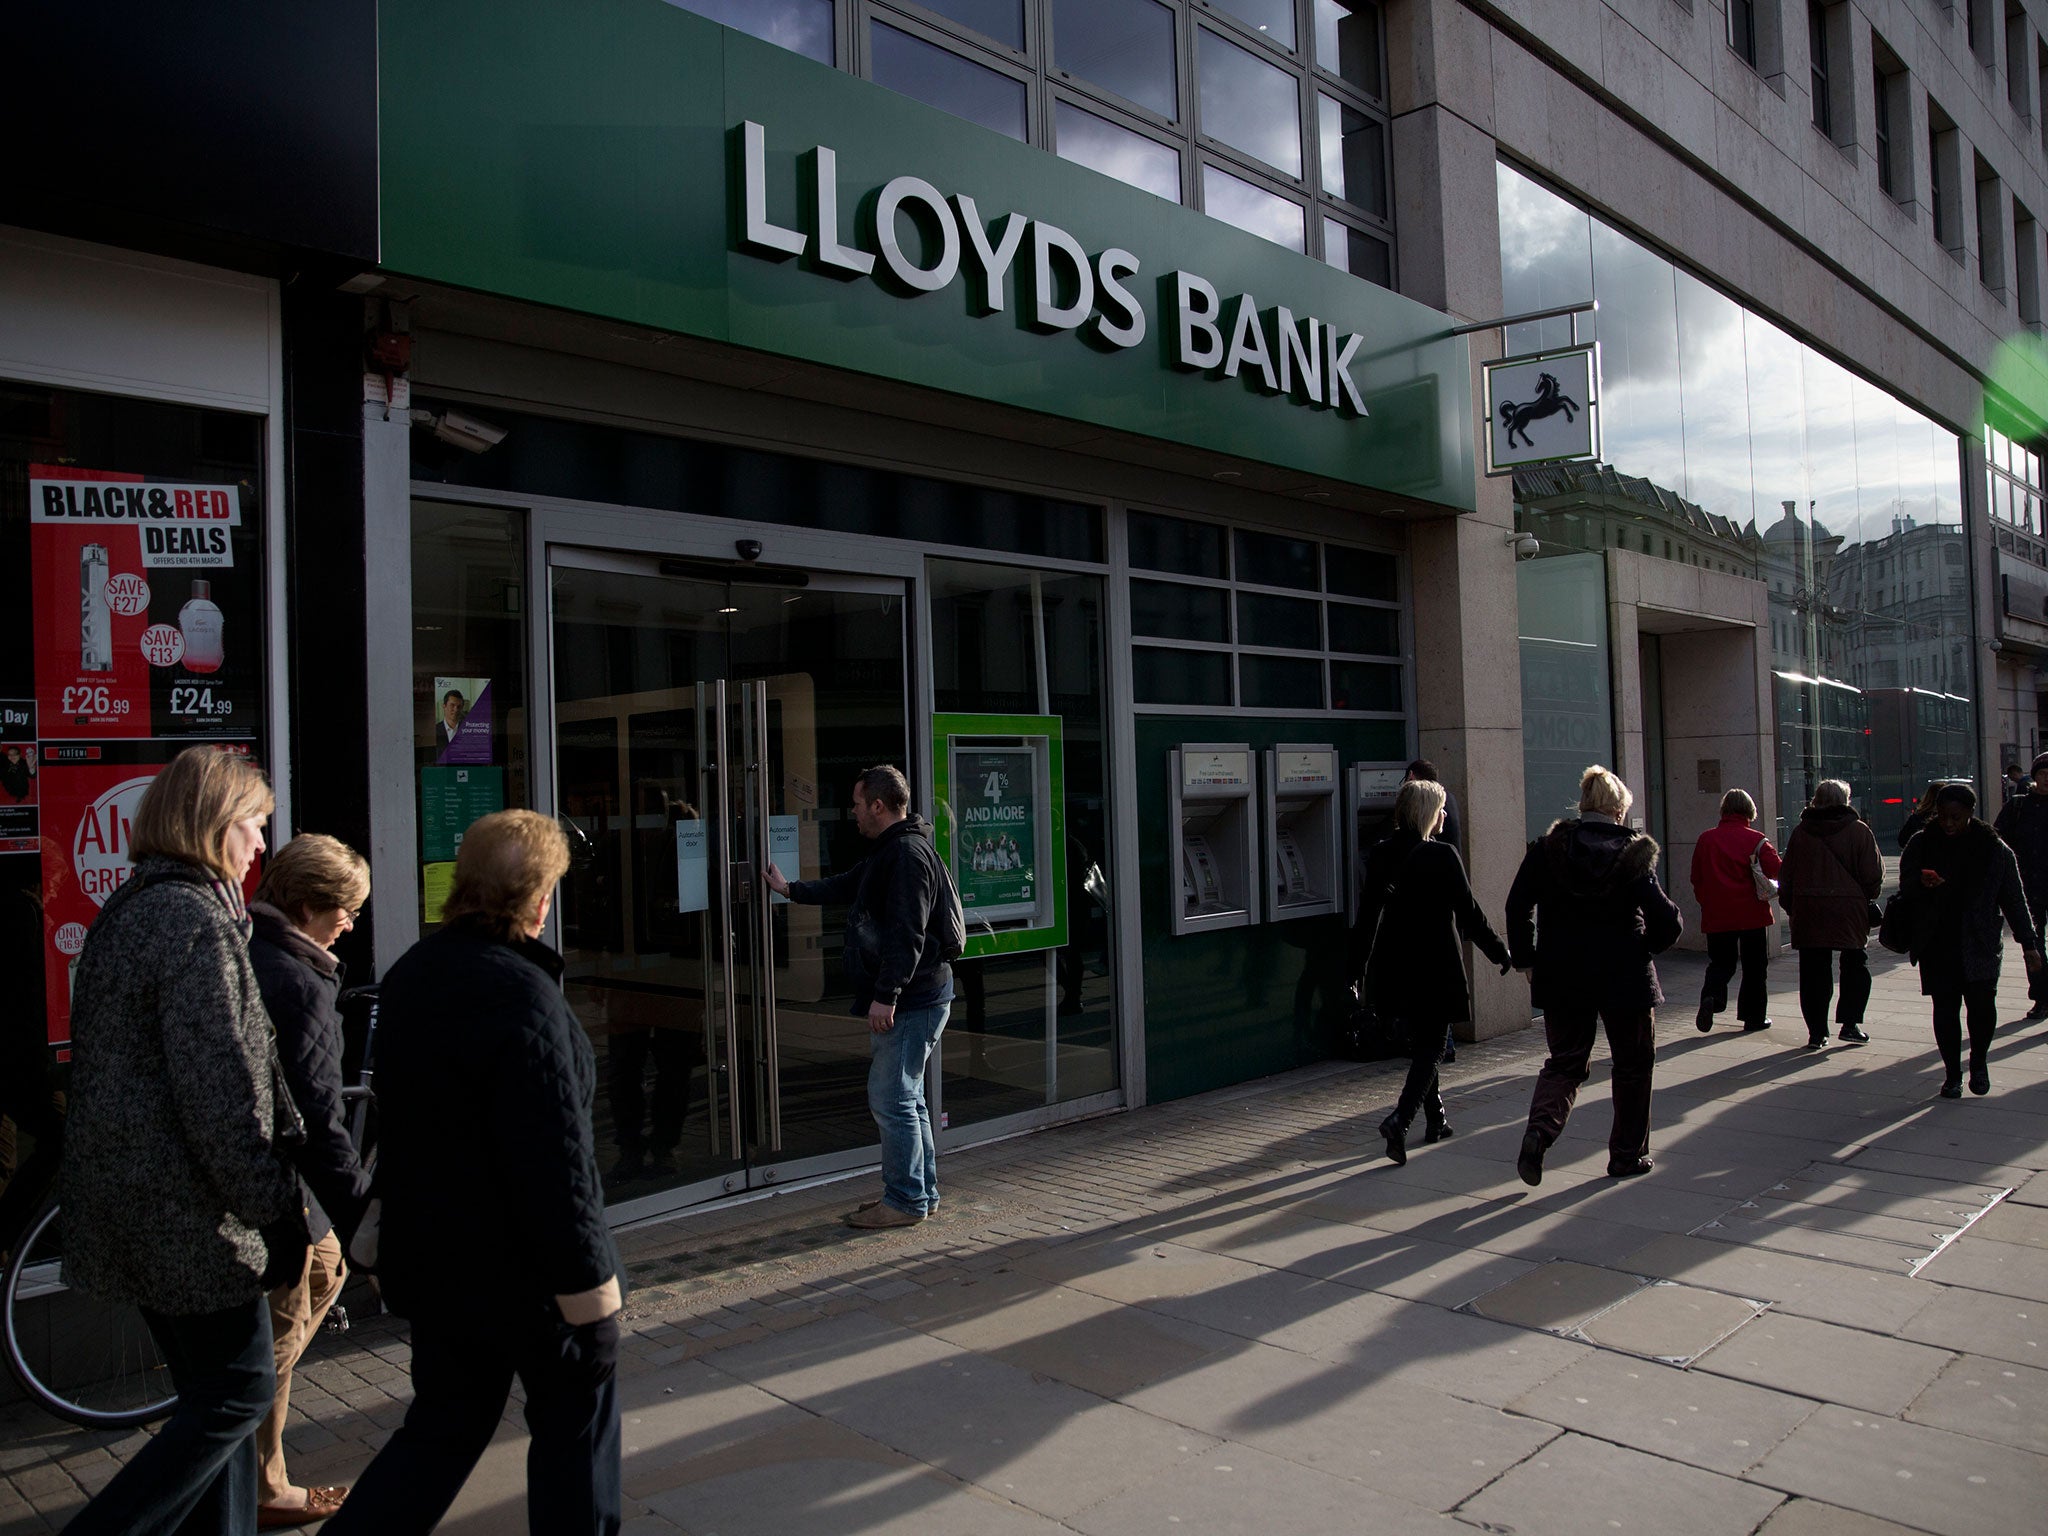 Lloyds faces a record PPI-related fine for a single institution